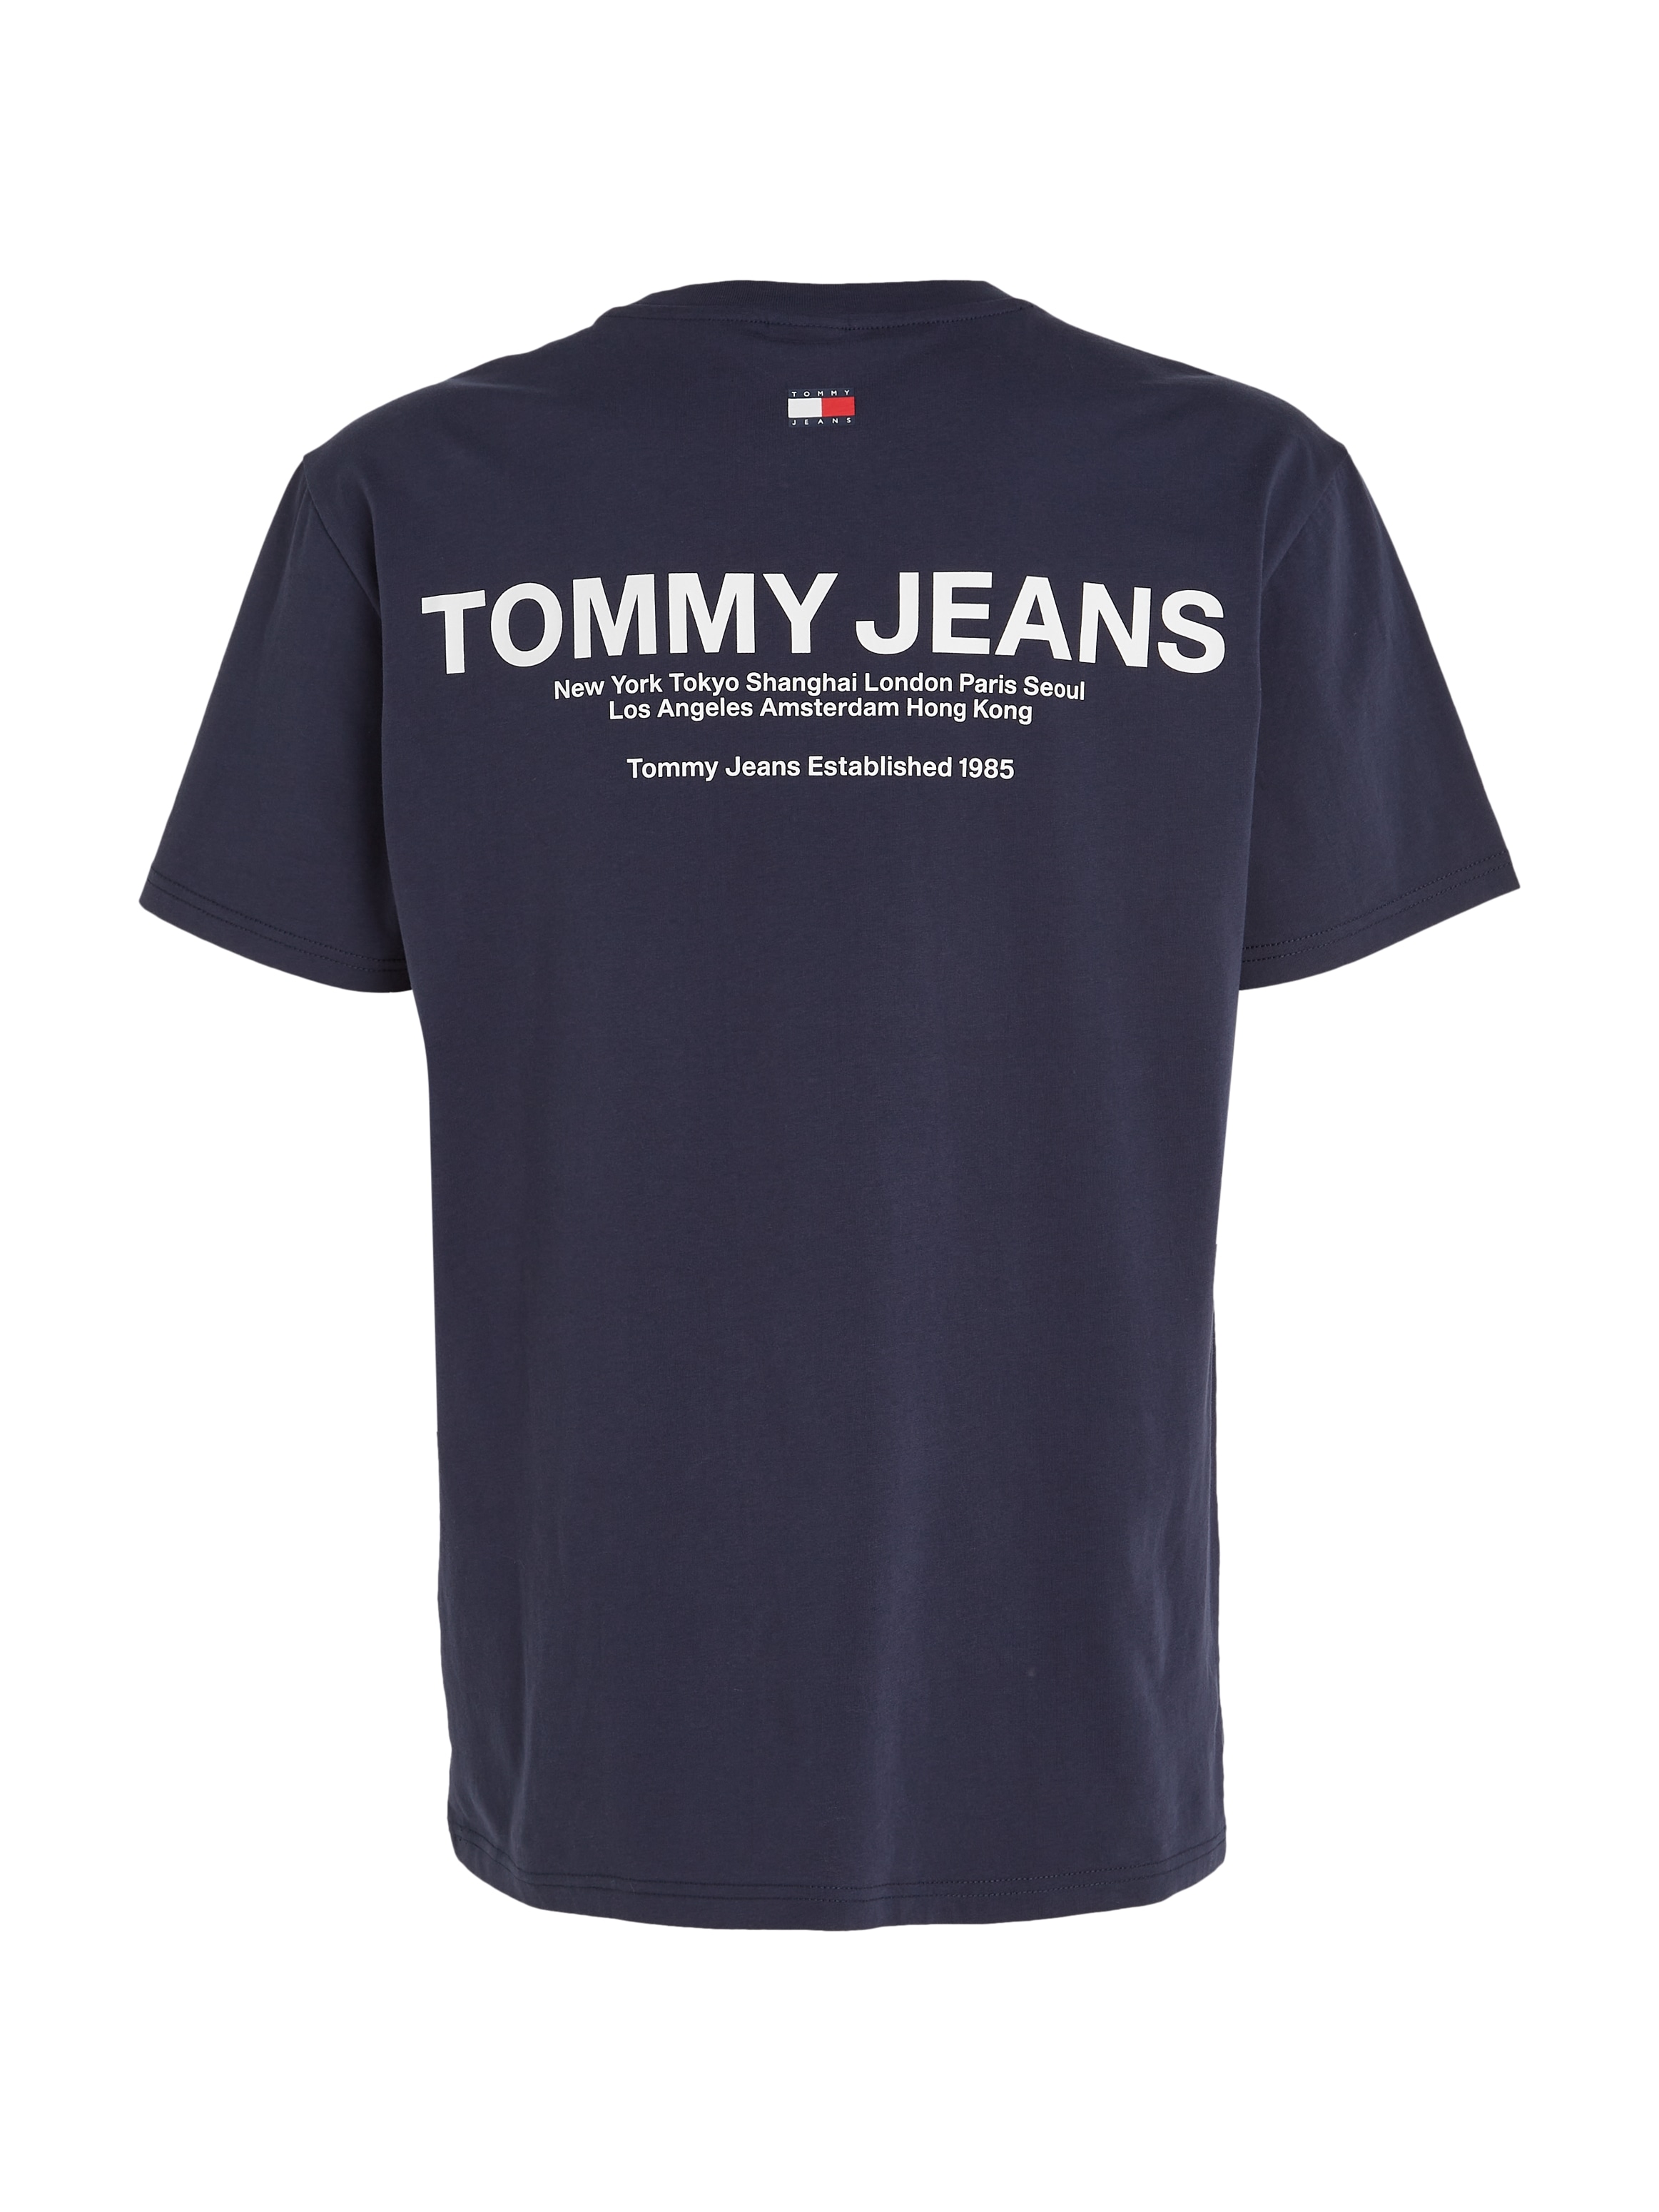 Tommy Jeans T-Shirt online »TJM PRINT BACK kaufen LINEAR TEE« OTTO CLSC bei